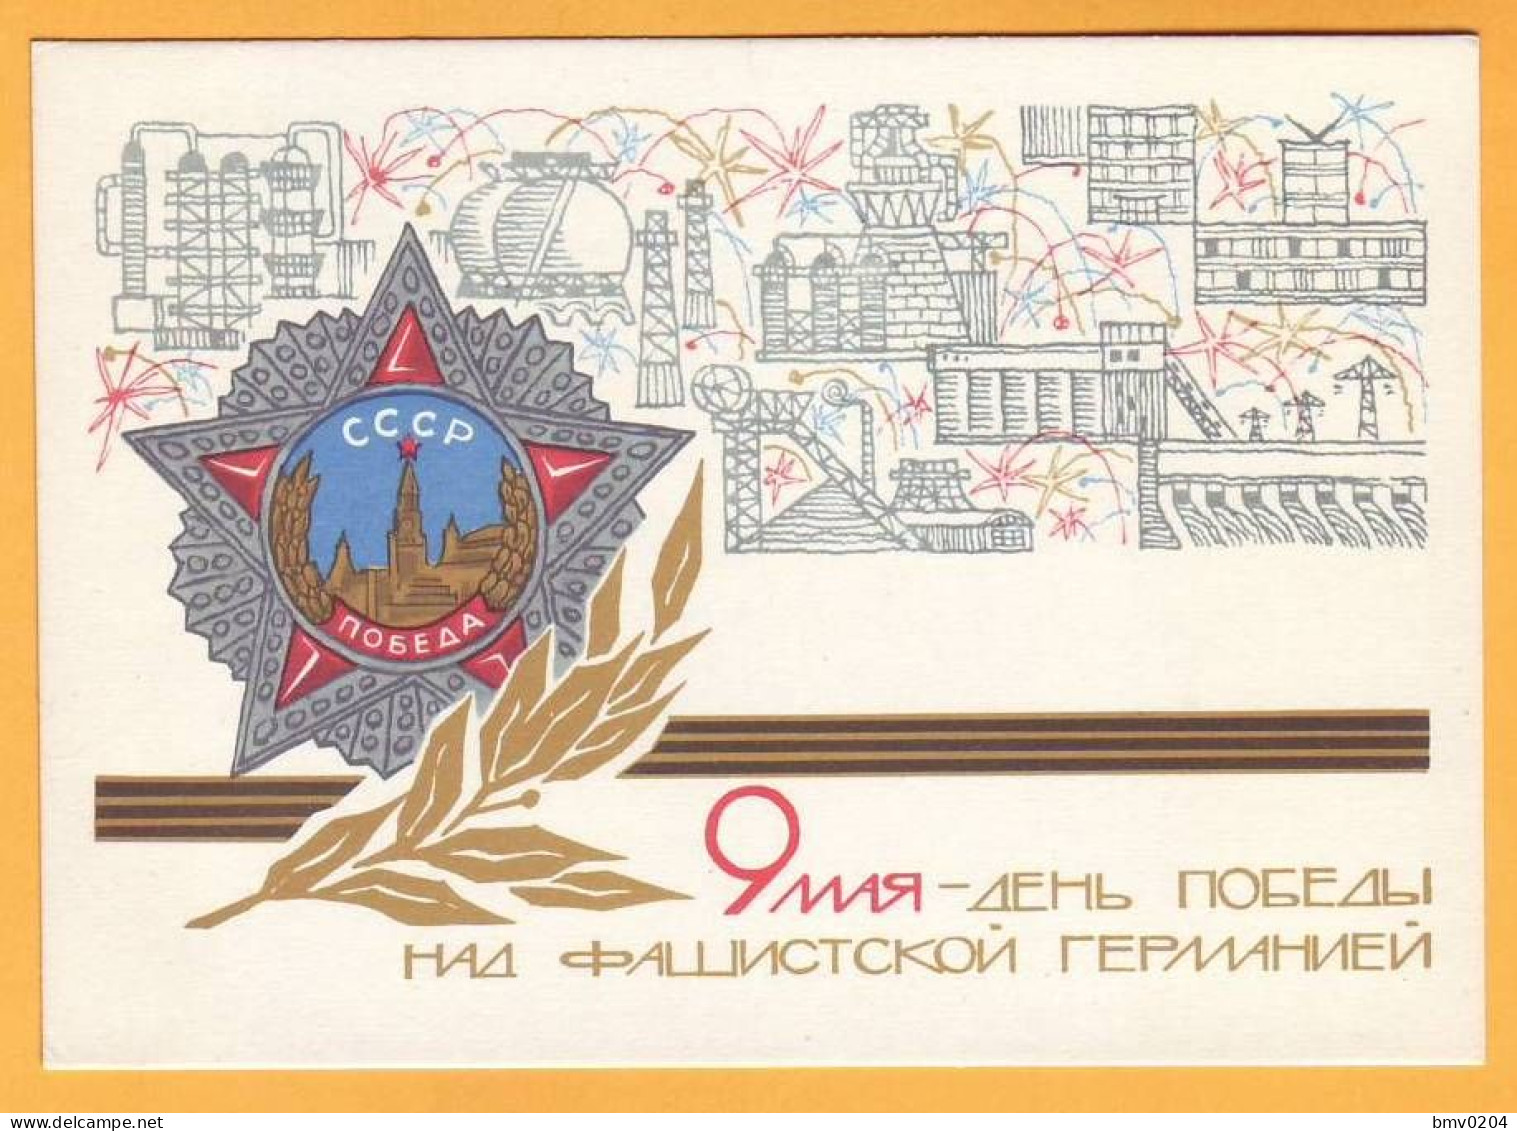 1967 RUSSIA RUSSIE USSR URSS May 9 Victory Day Over Nazi Germany. Order Of The "Victory". - 1960-69